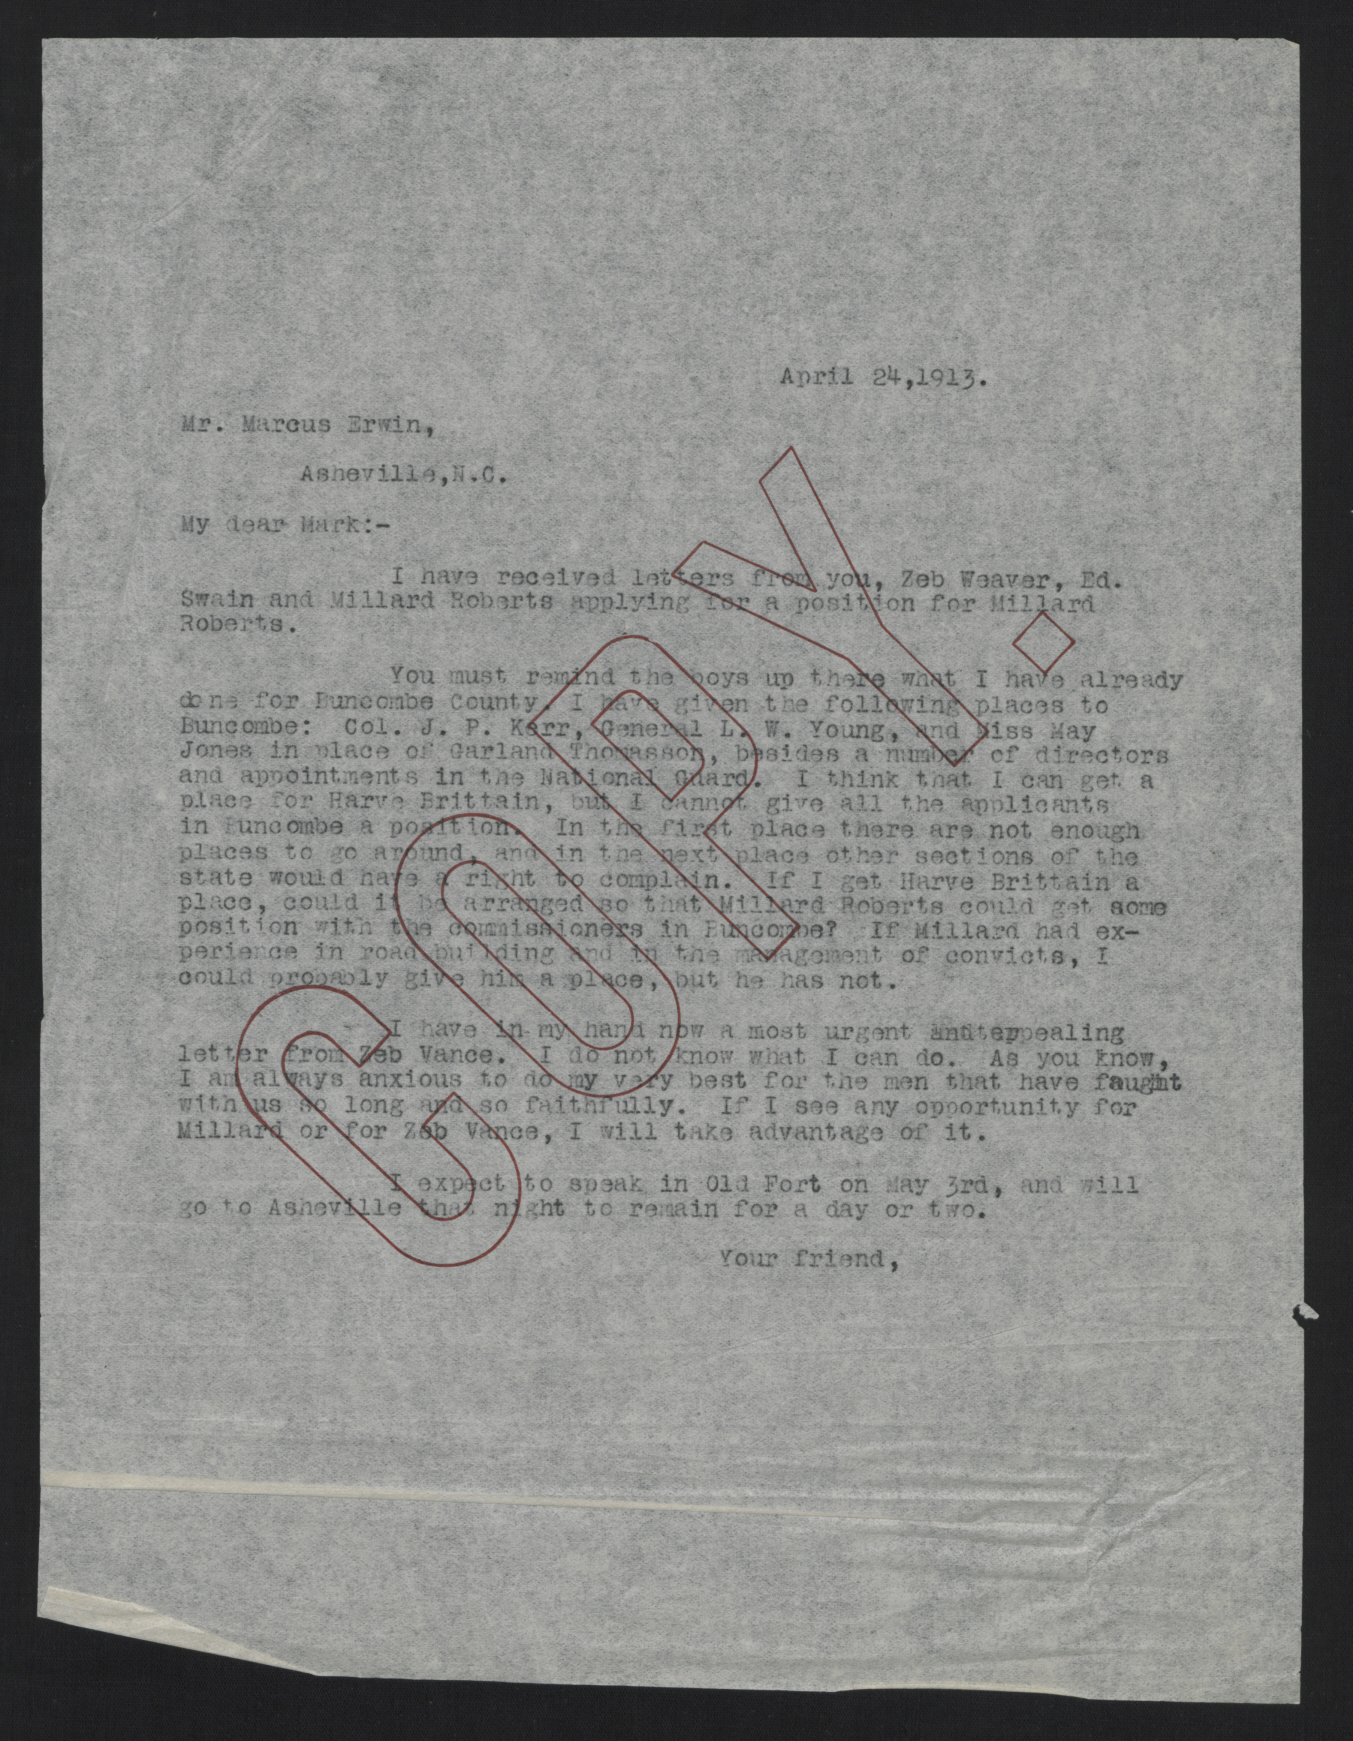 Letter from Craig to Erwin, April 24, 1913